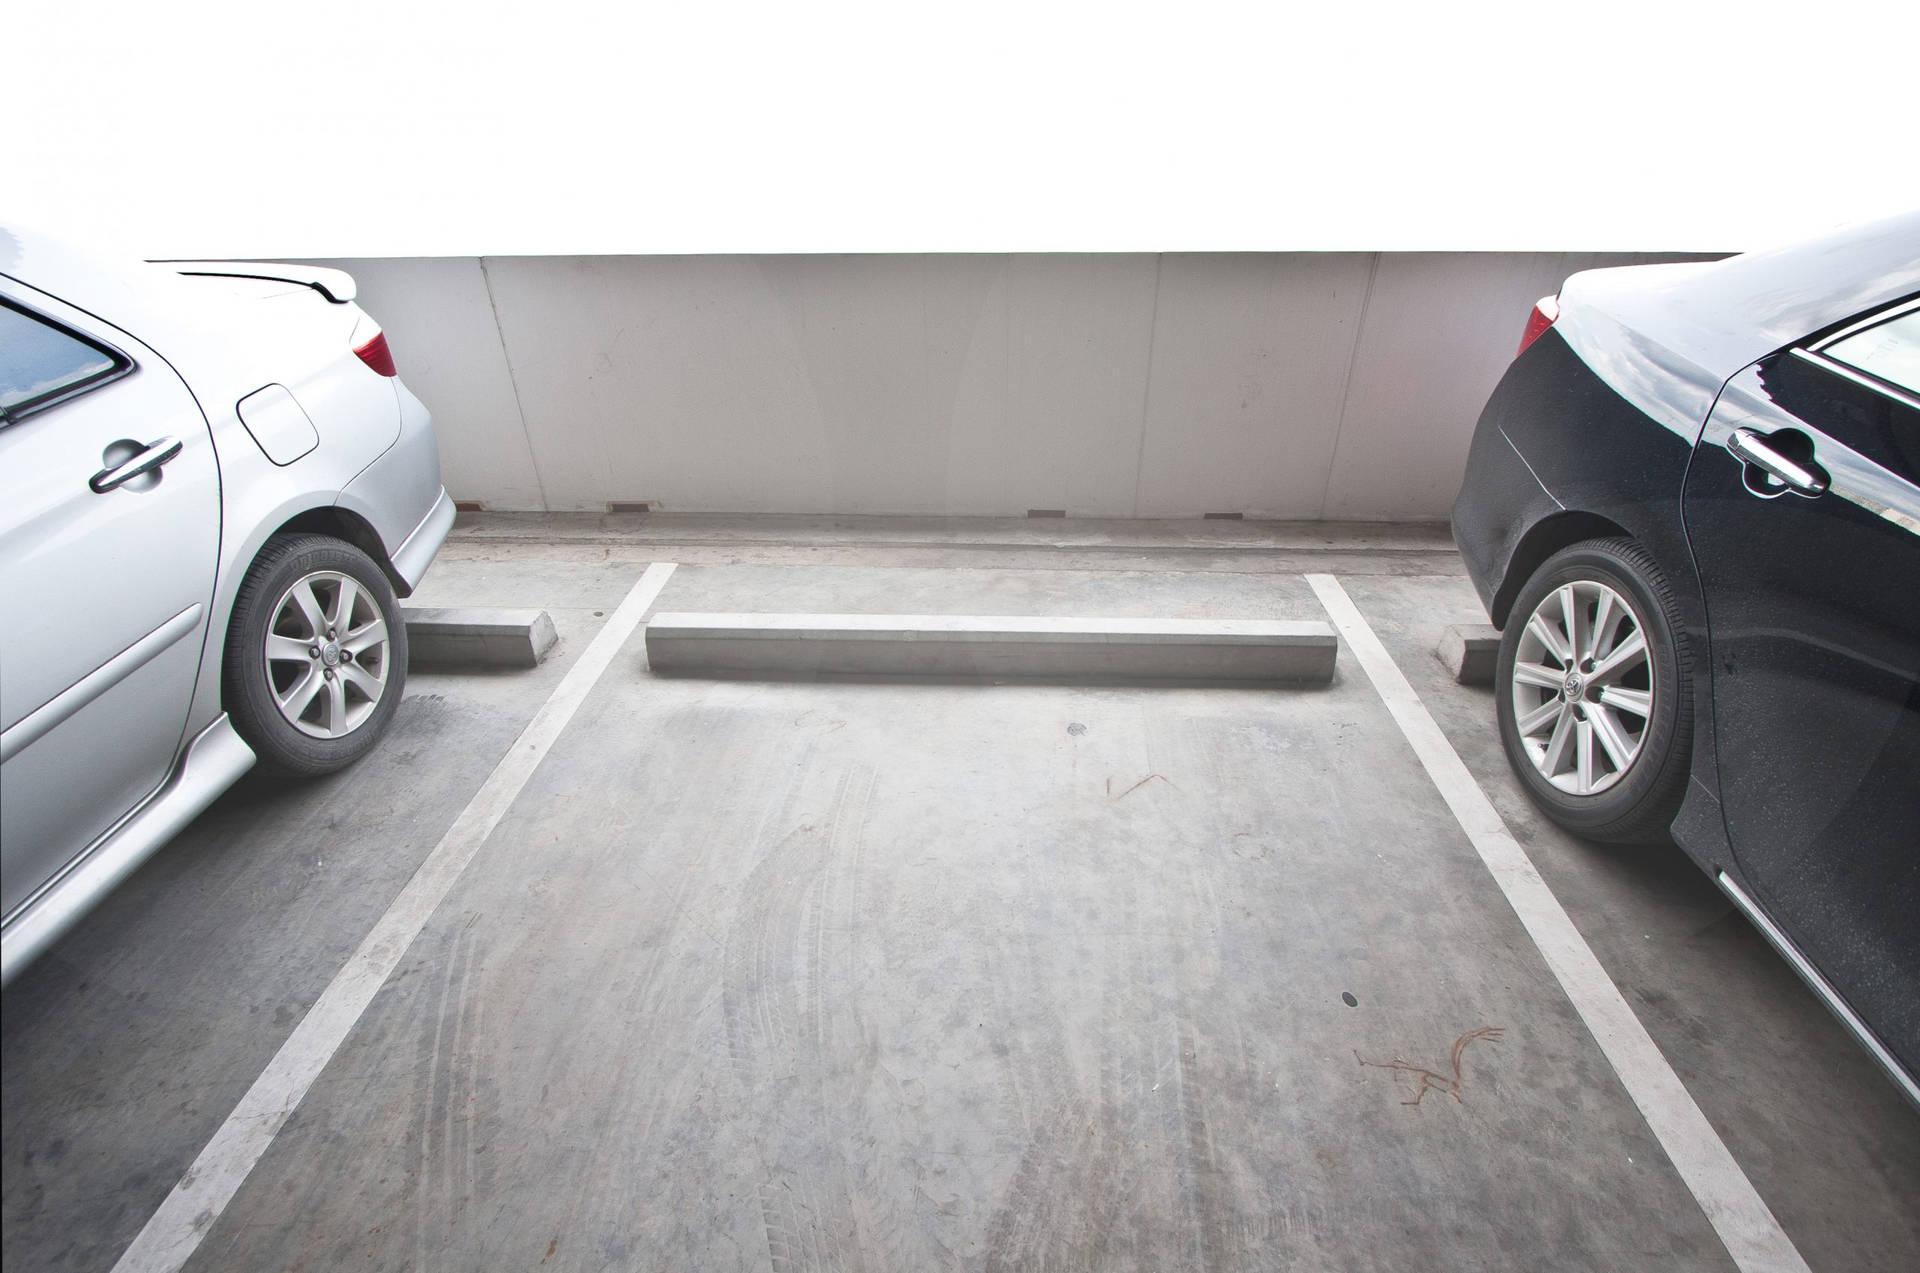 Available Parking Slot Between Two Cars Background